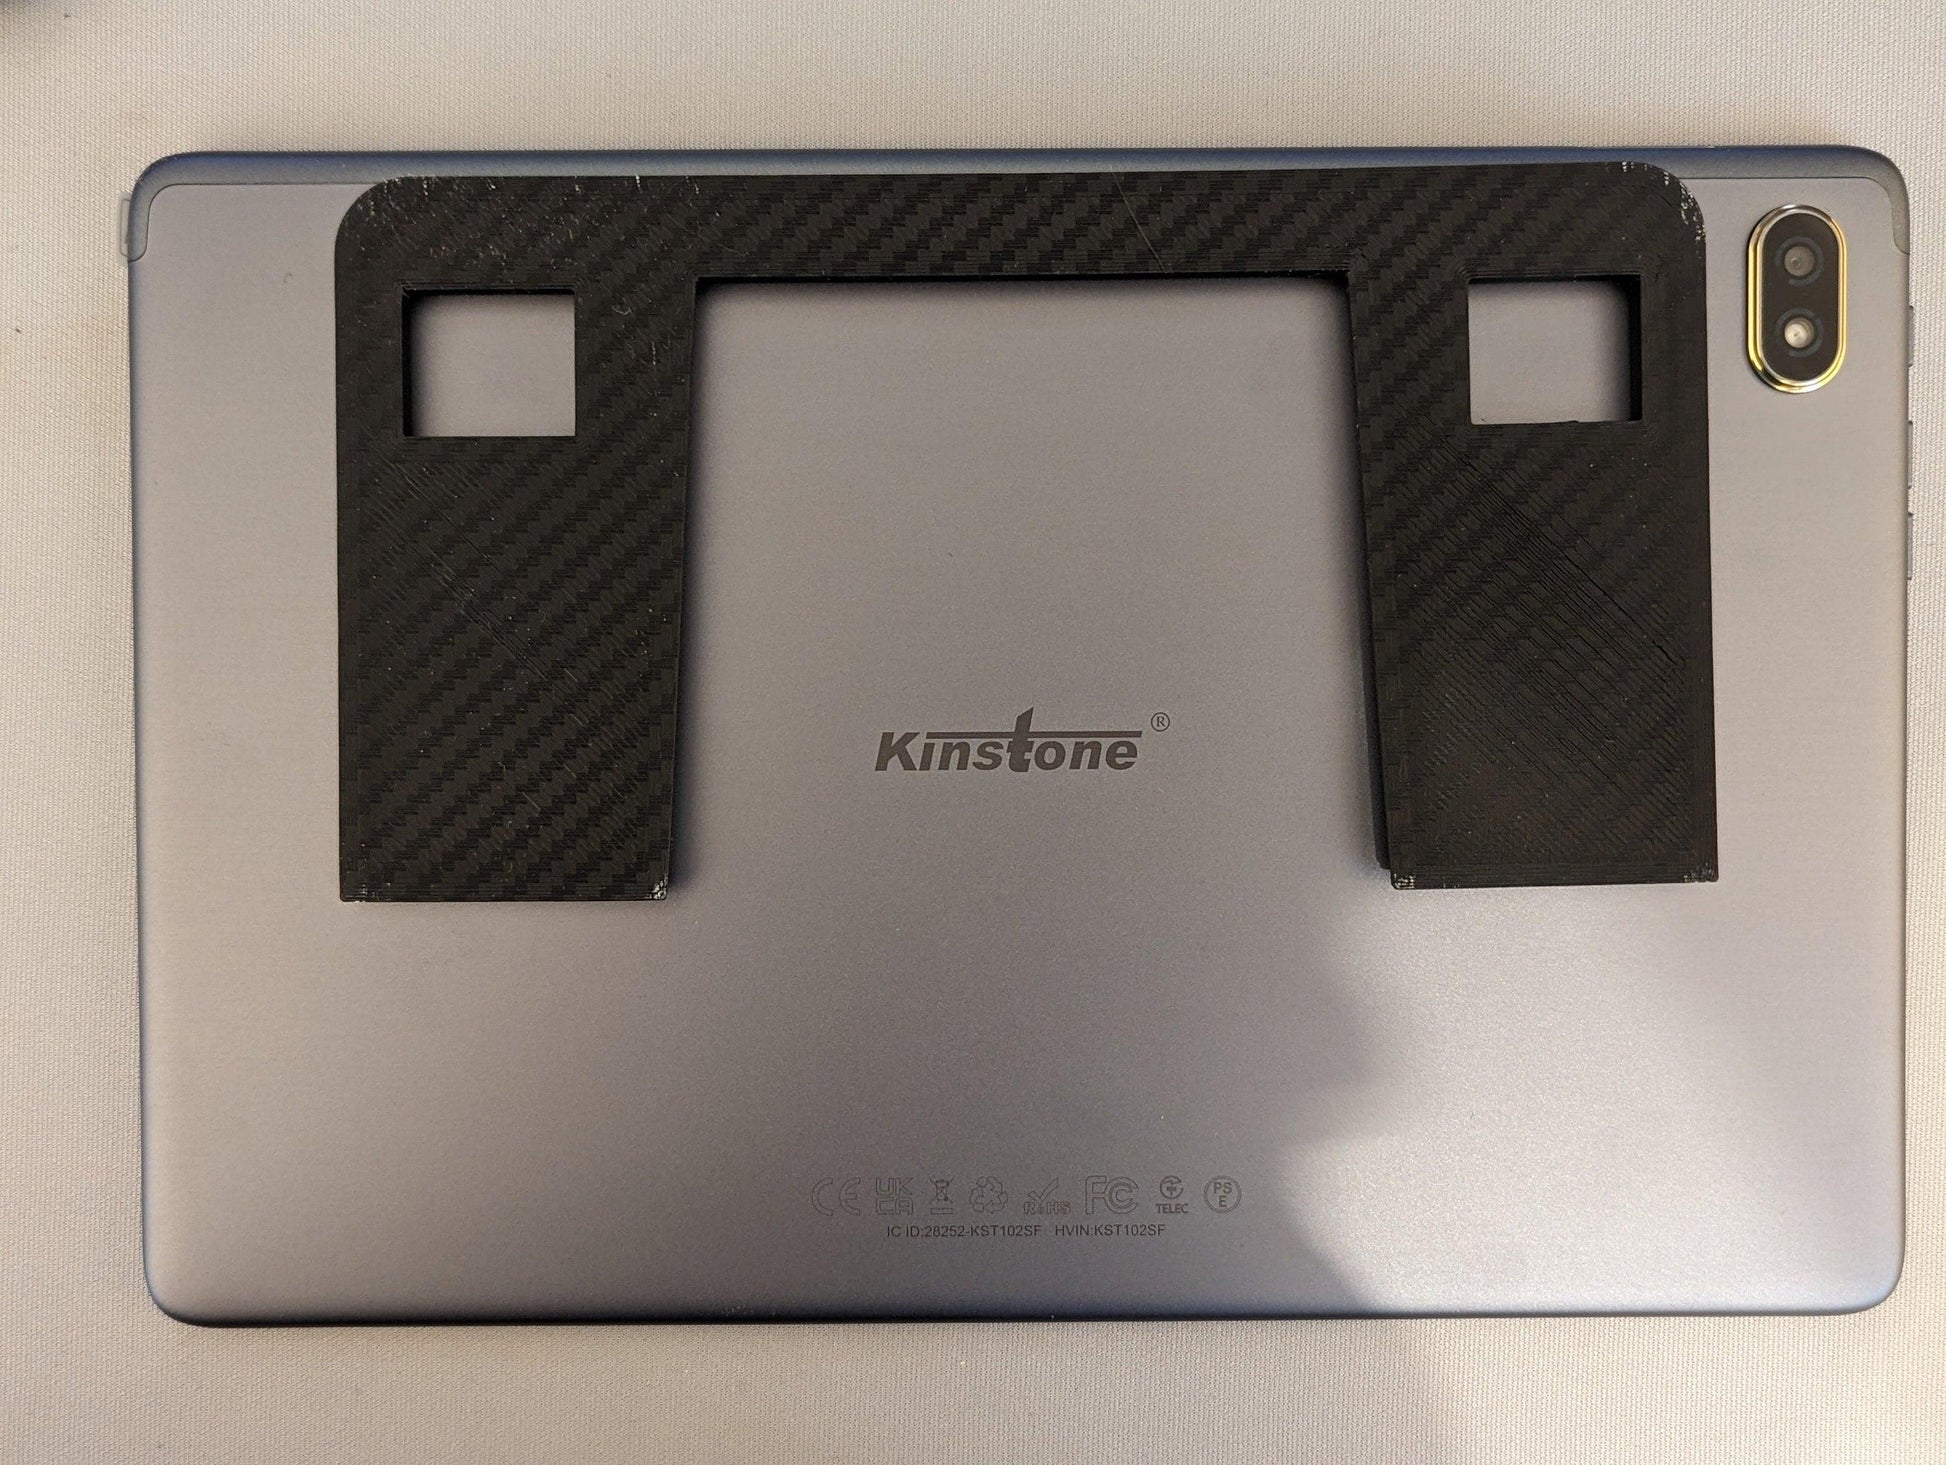 Low profile tablet mouning plate installed on a tablet